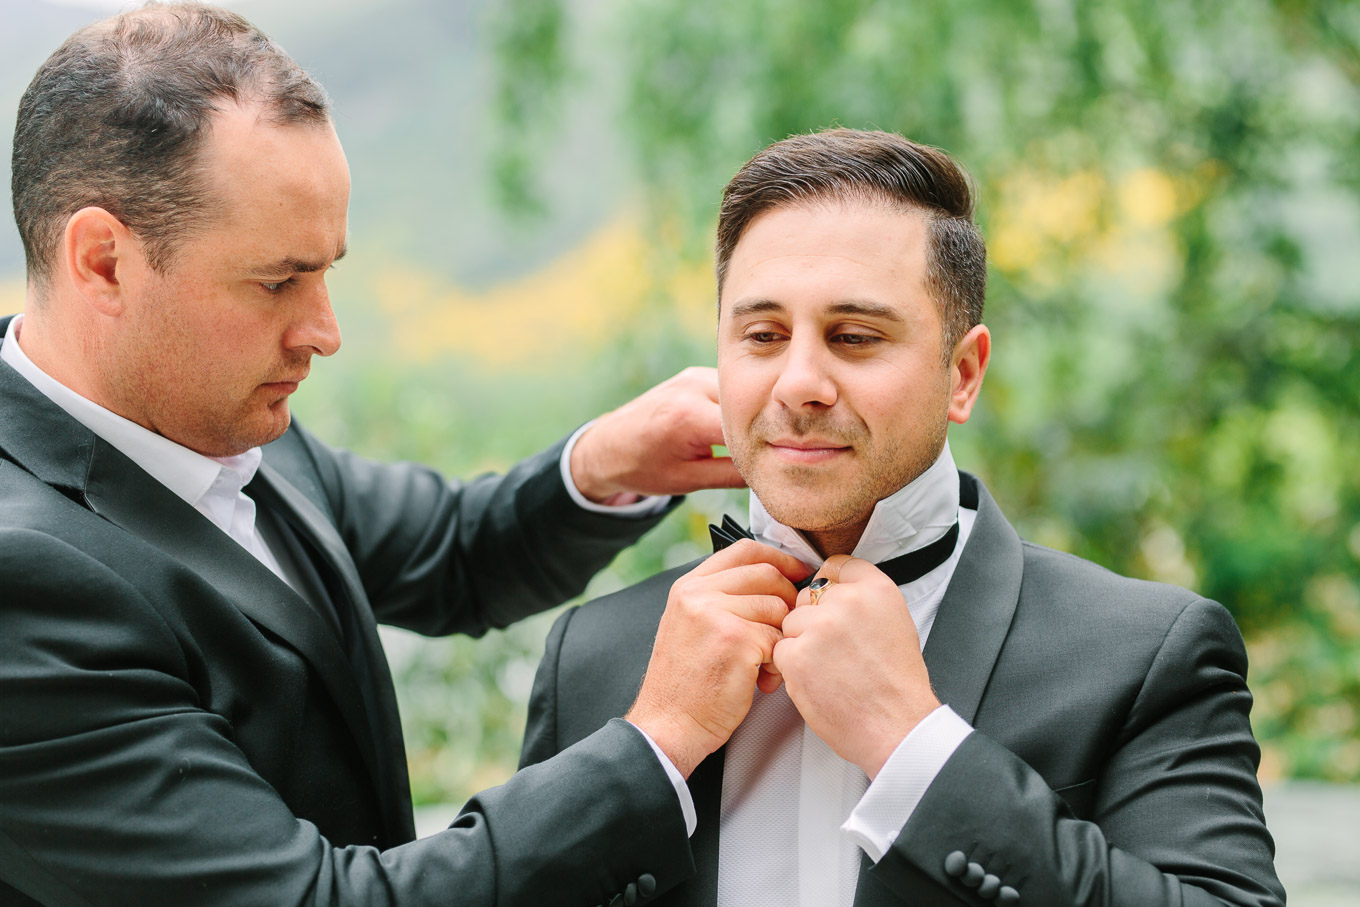 Groom getting dressed at Millbrook Resort Queenstown New Zealand wedding by Mary Costa Photography | www.marycostaweddings.com